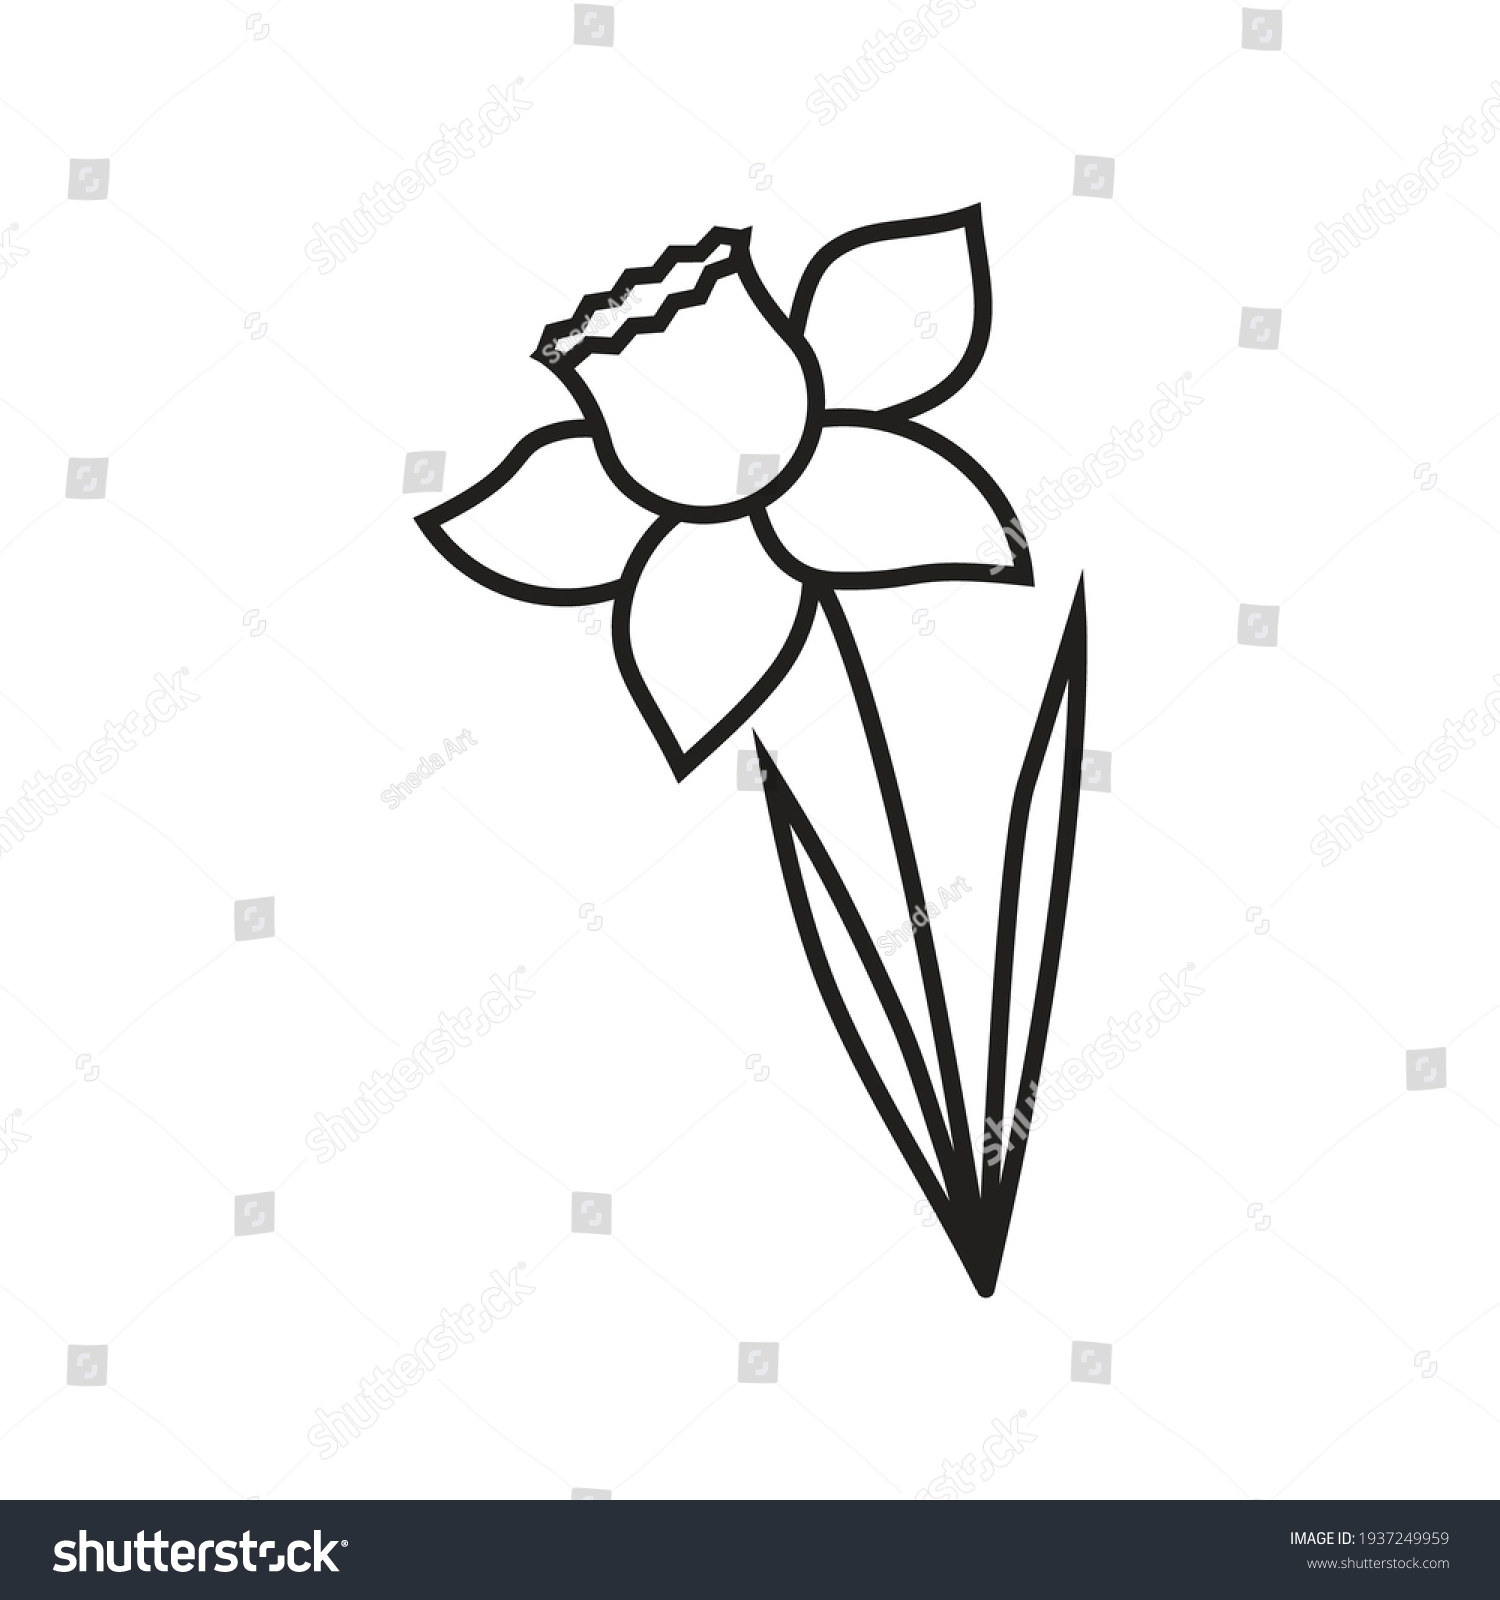 SVG of simple linear vector image drawing abstract logo icon daffodil spring flower garden isolated black on white background svg